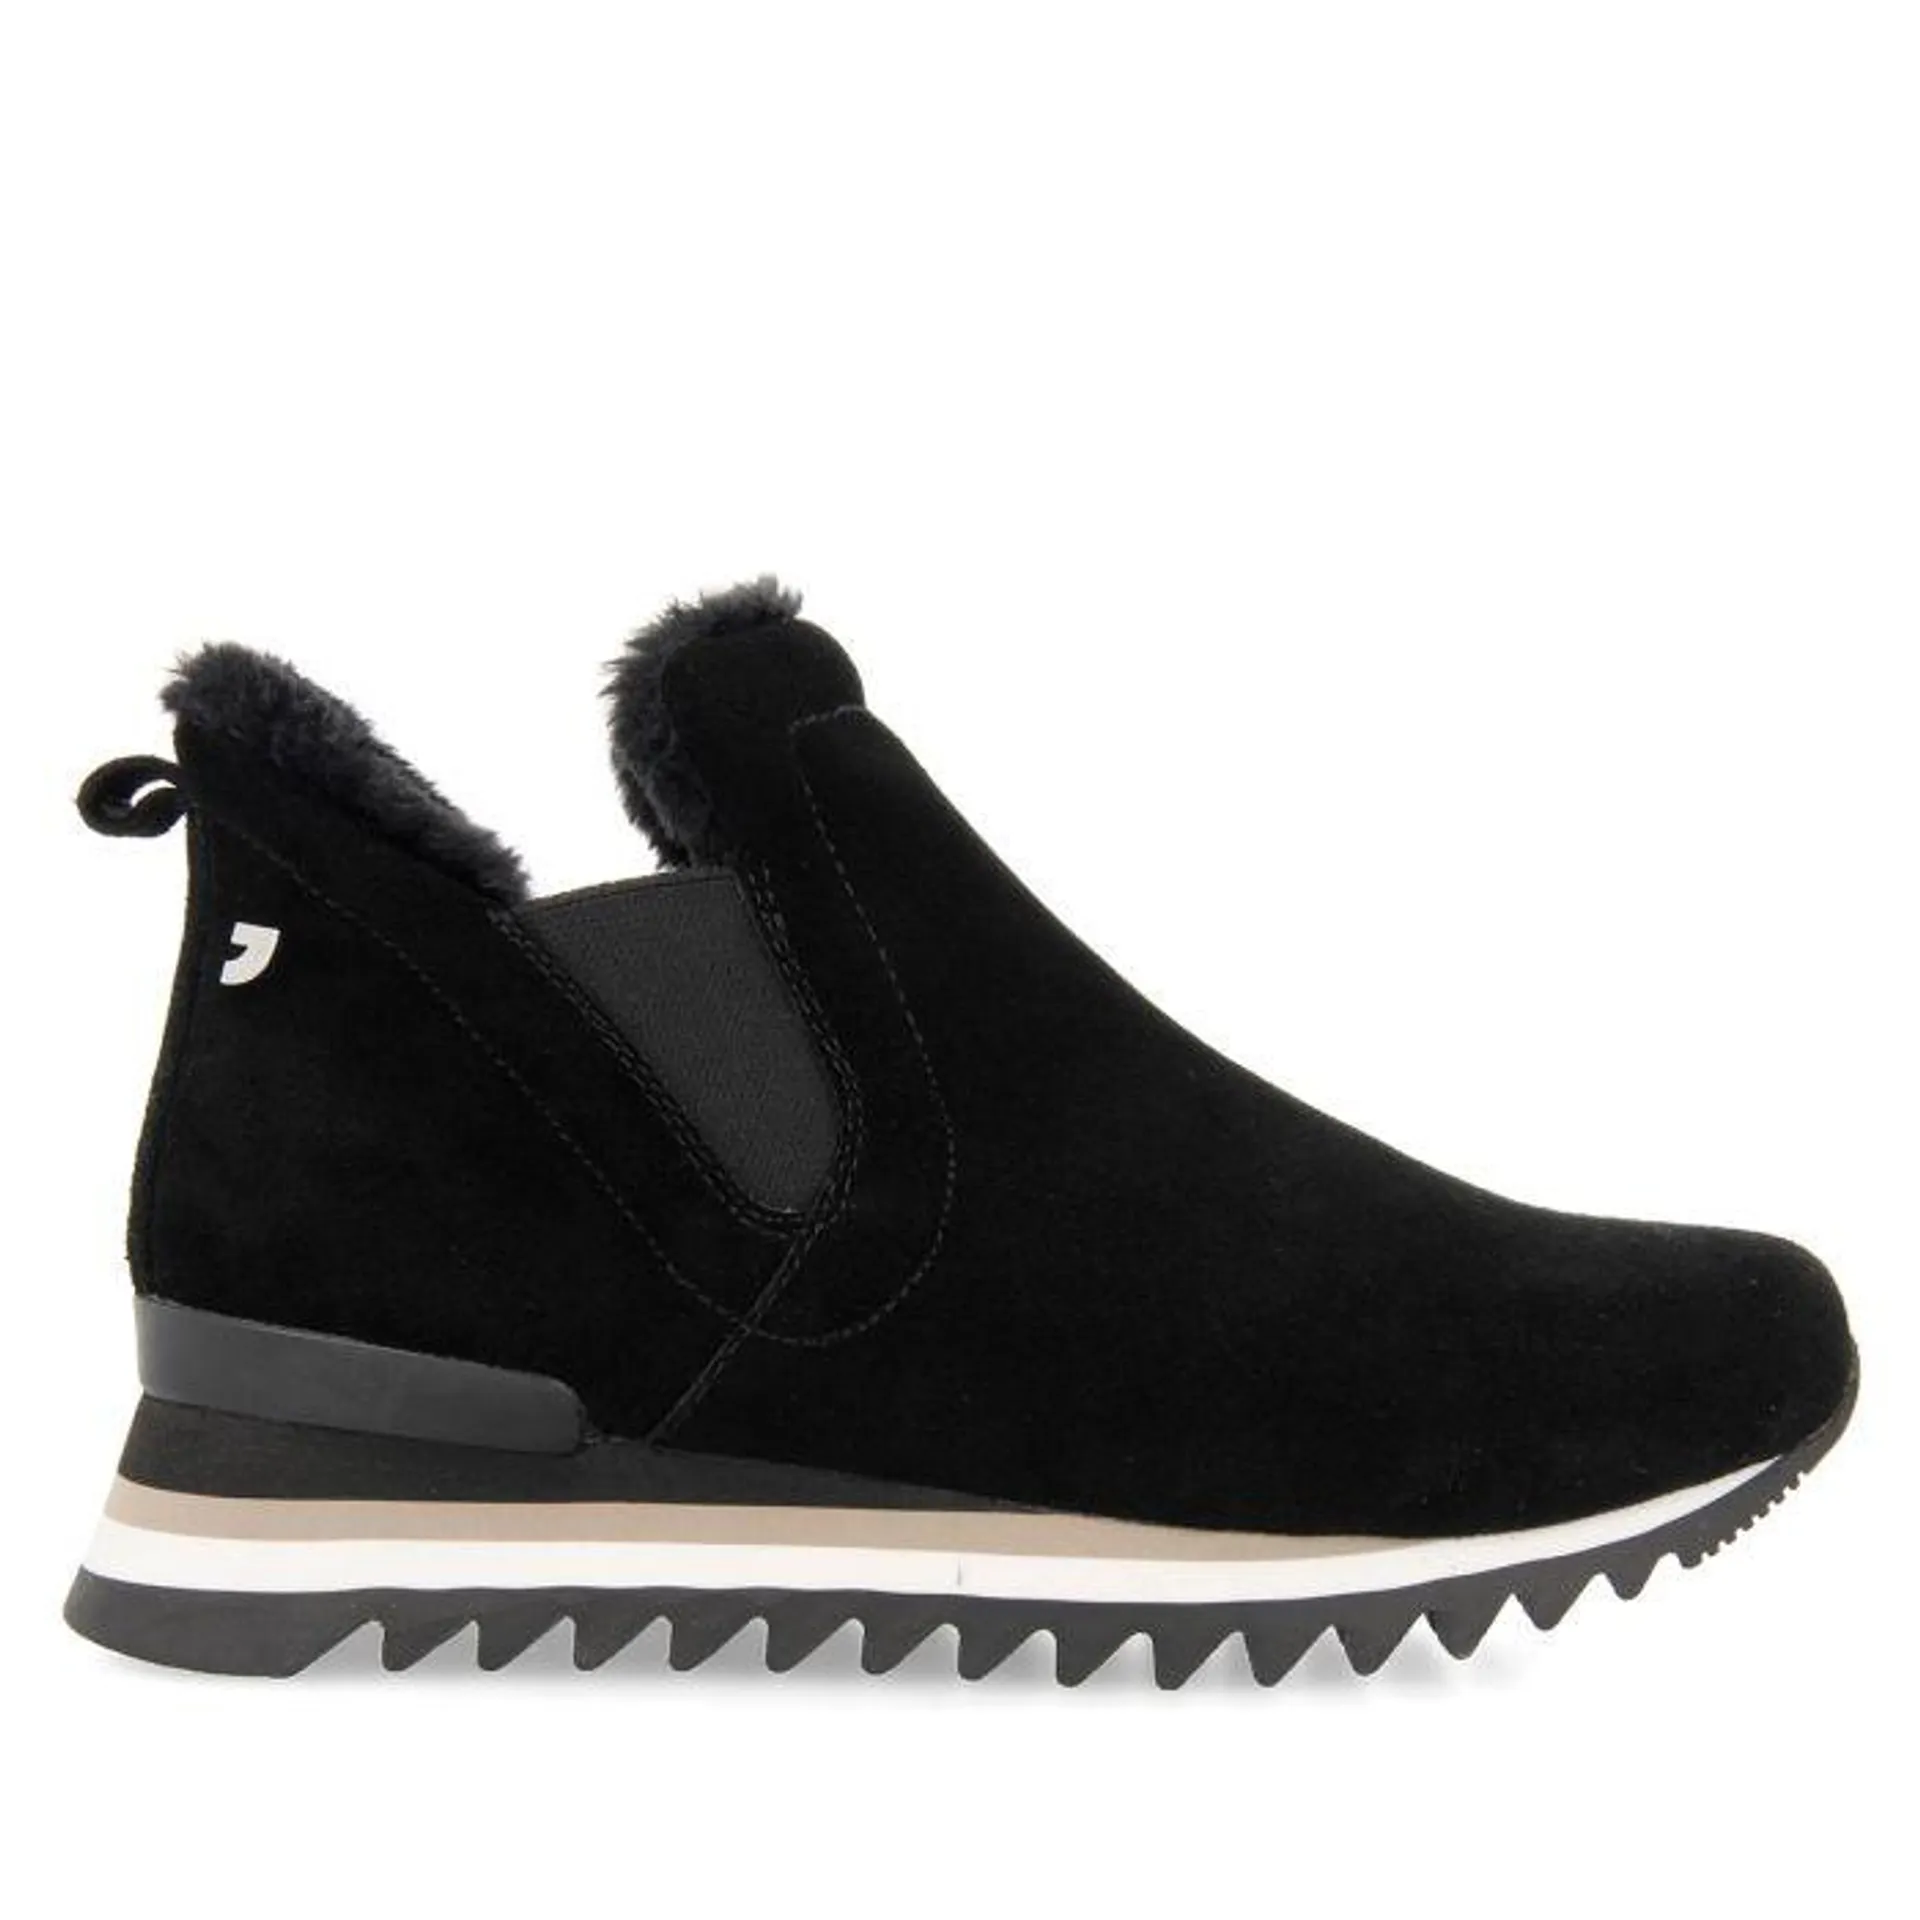 Black sneakers ankle boots slip style with mini wedge for woman ECKERO